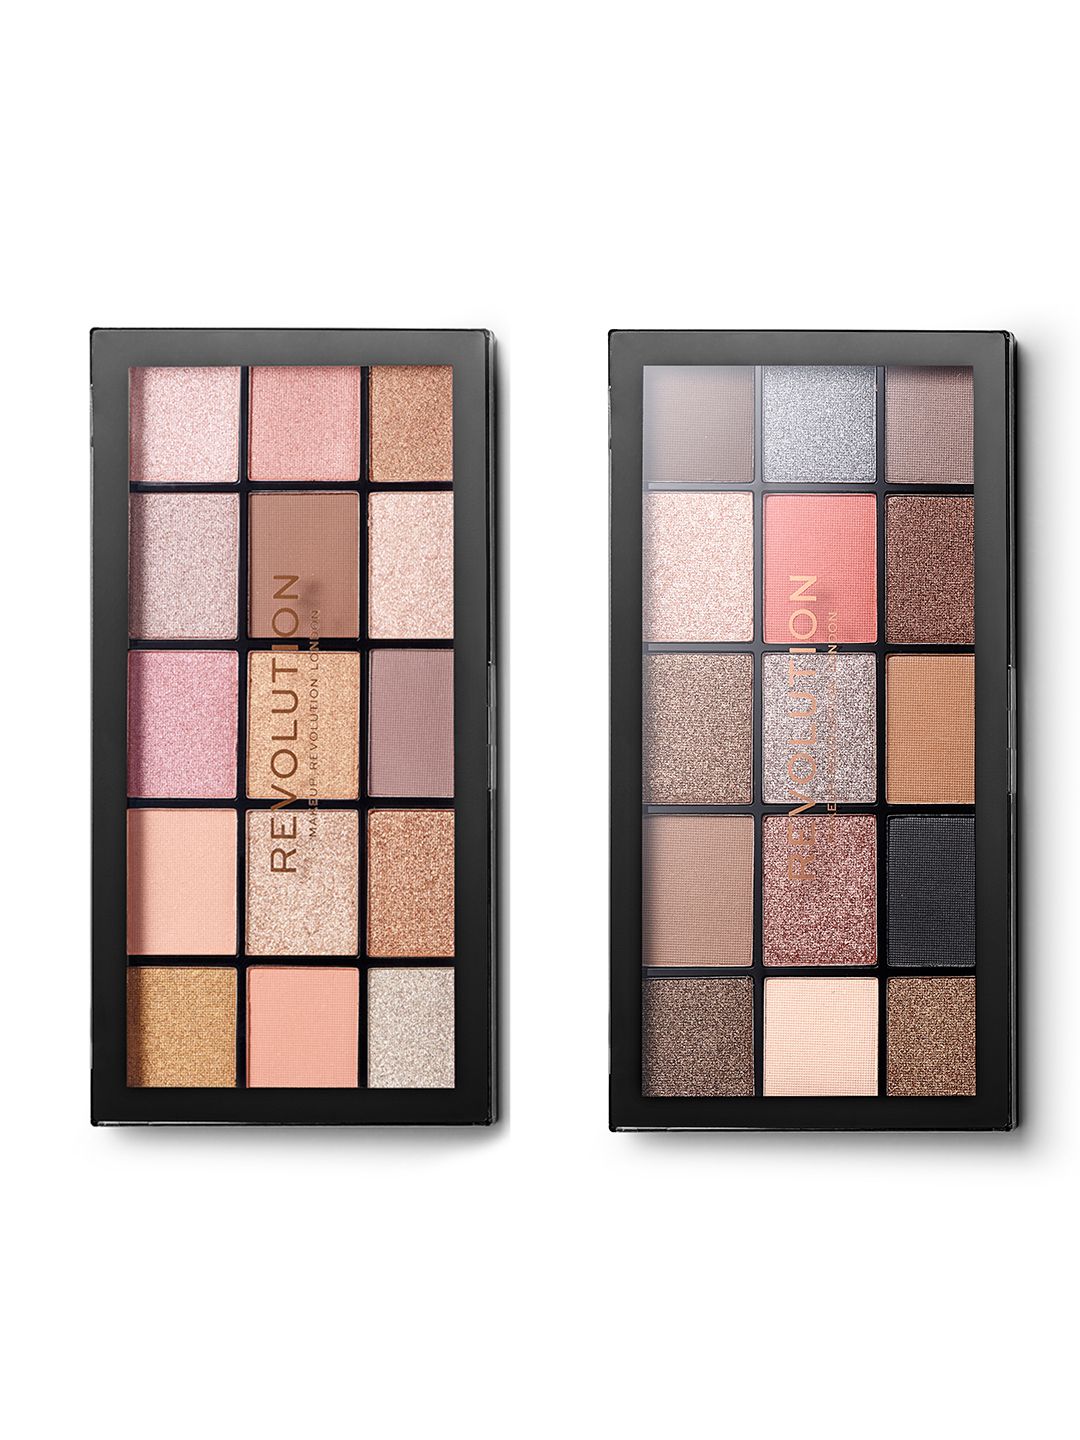 Makeup Revolution London Reloaded Eyeshadow Combo 53 - Fundamental & Hypnotic Price in India